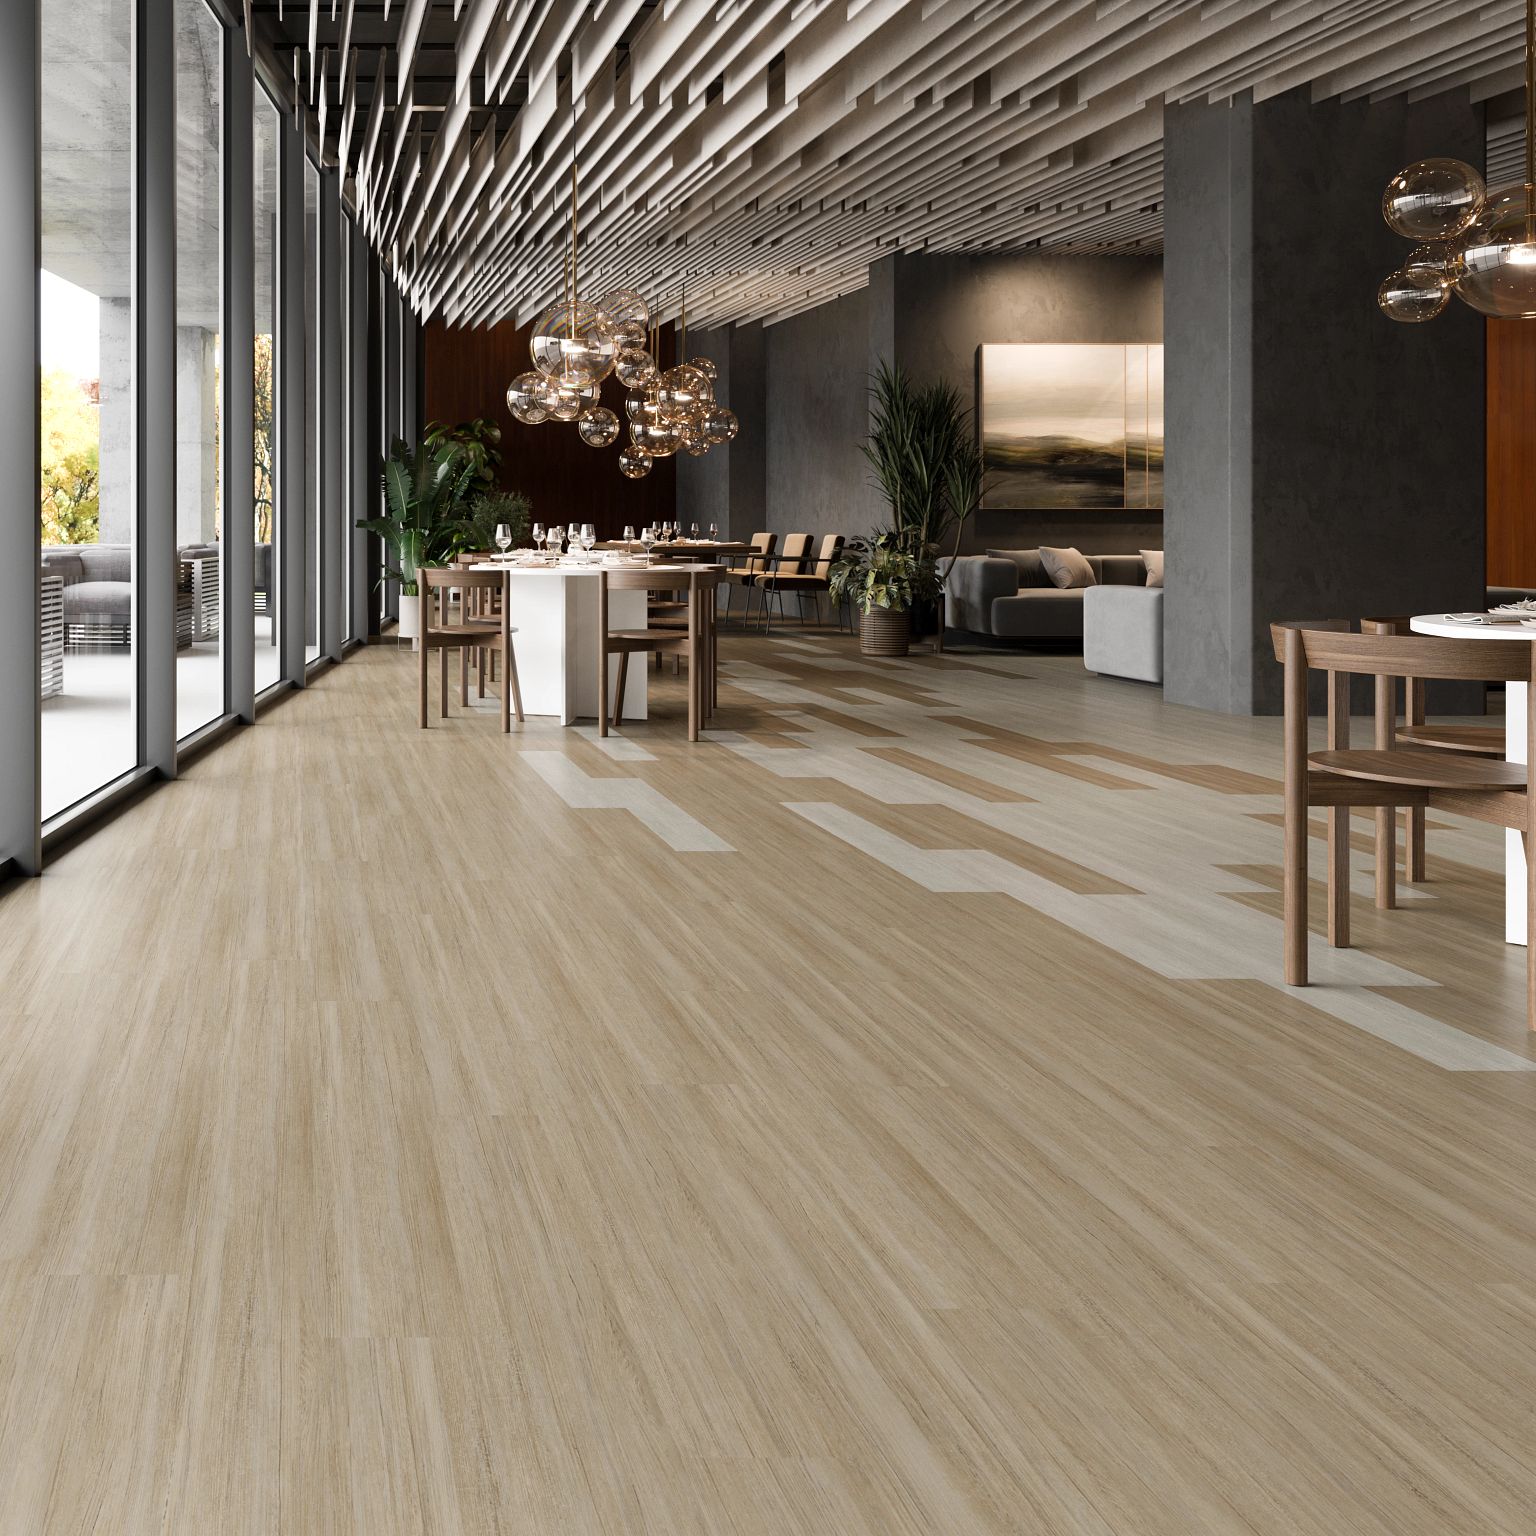 working directly with flooring manufacturers